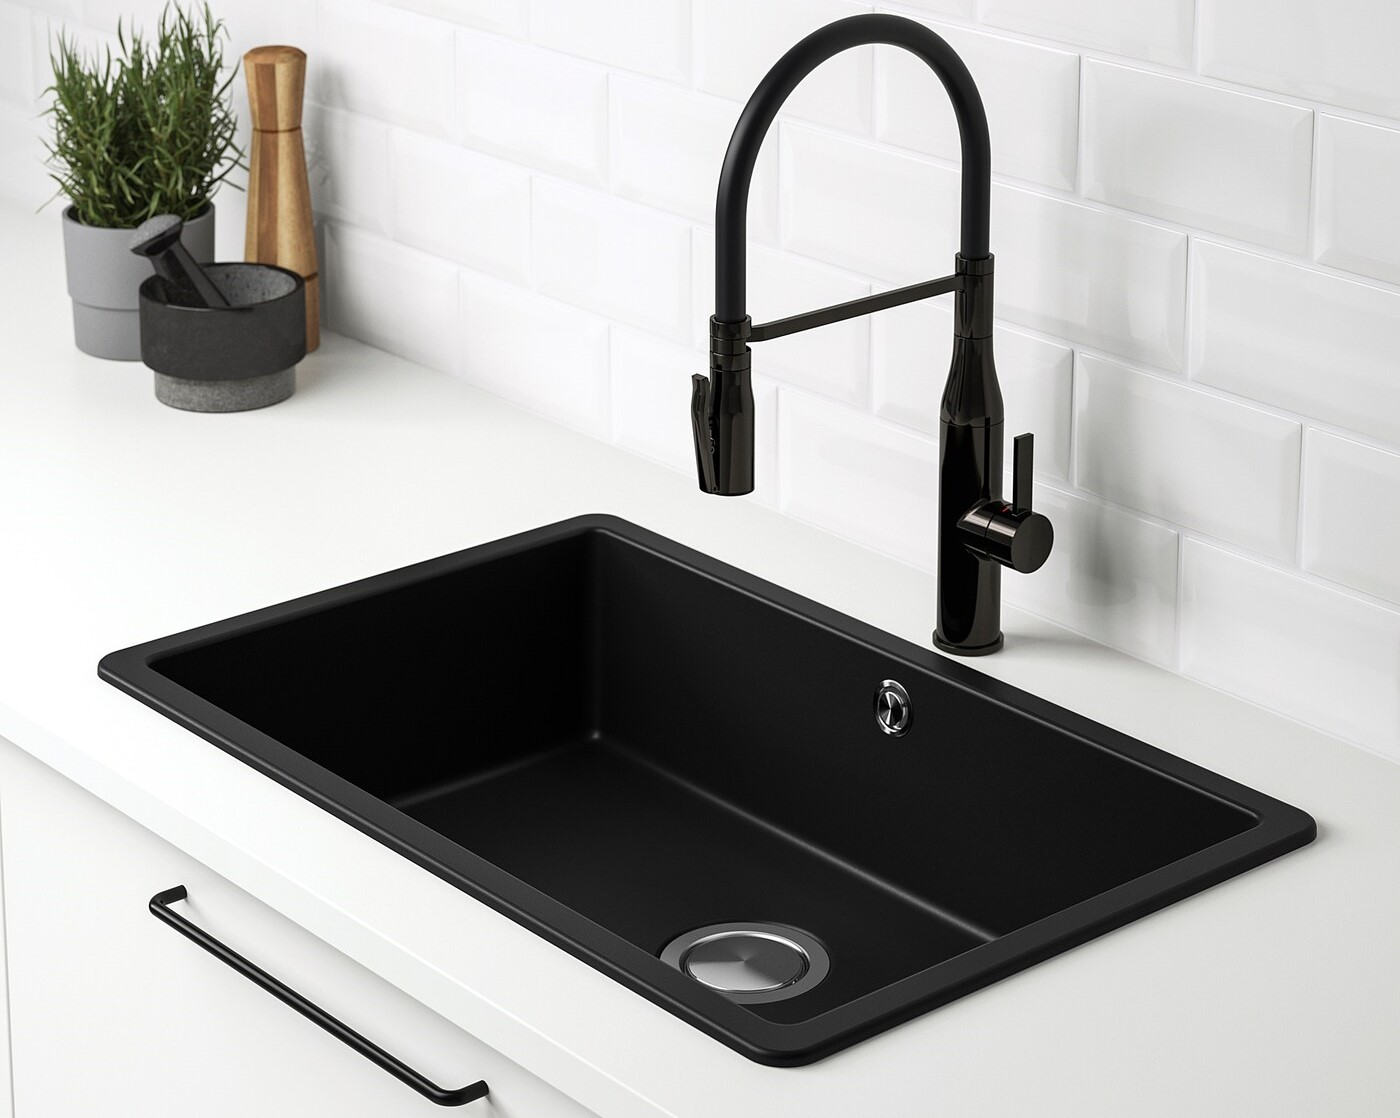 How To Clean A Black Sink